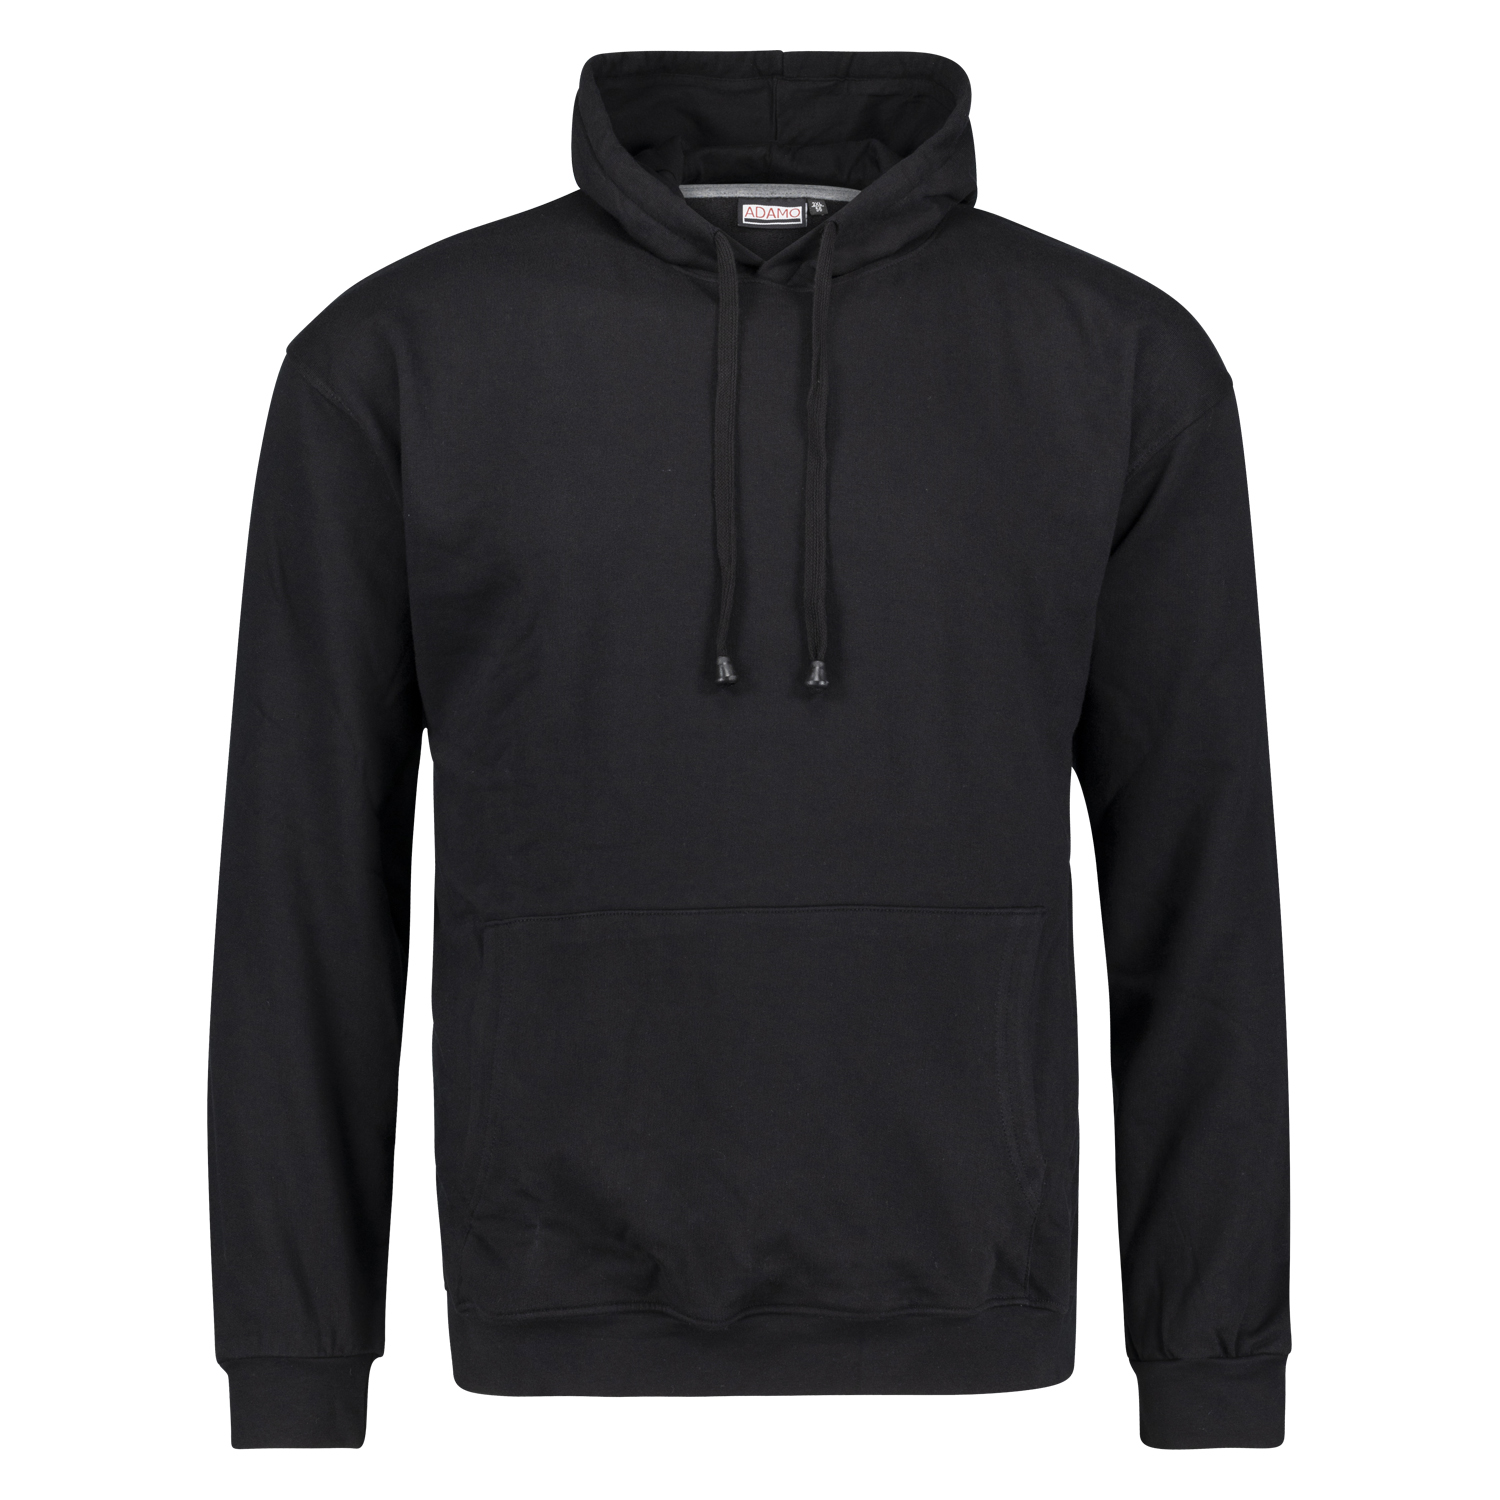 Hooded sweatshirt in black series ATHEN by Adamo up to oversize 14XL